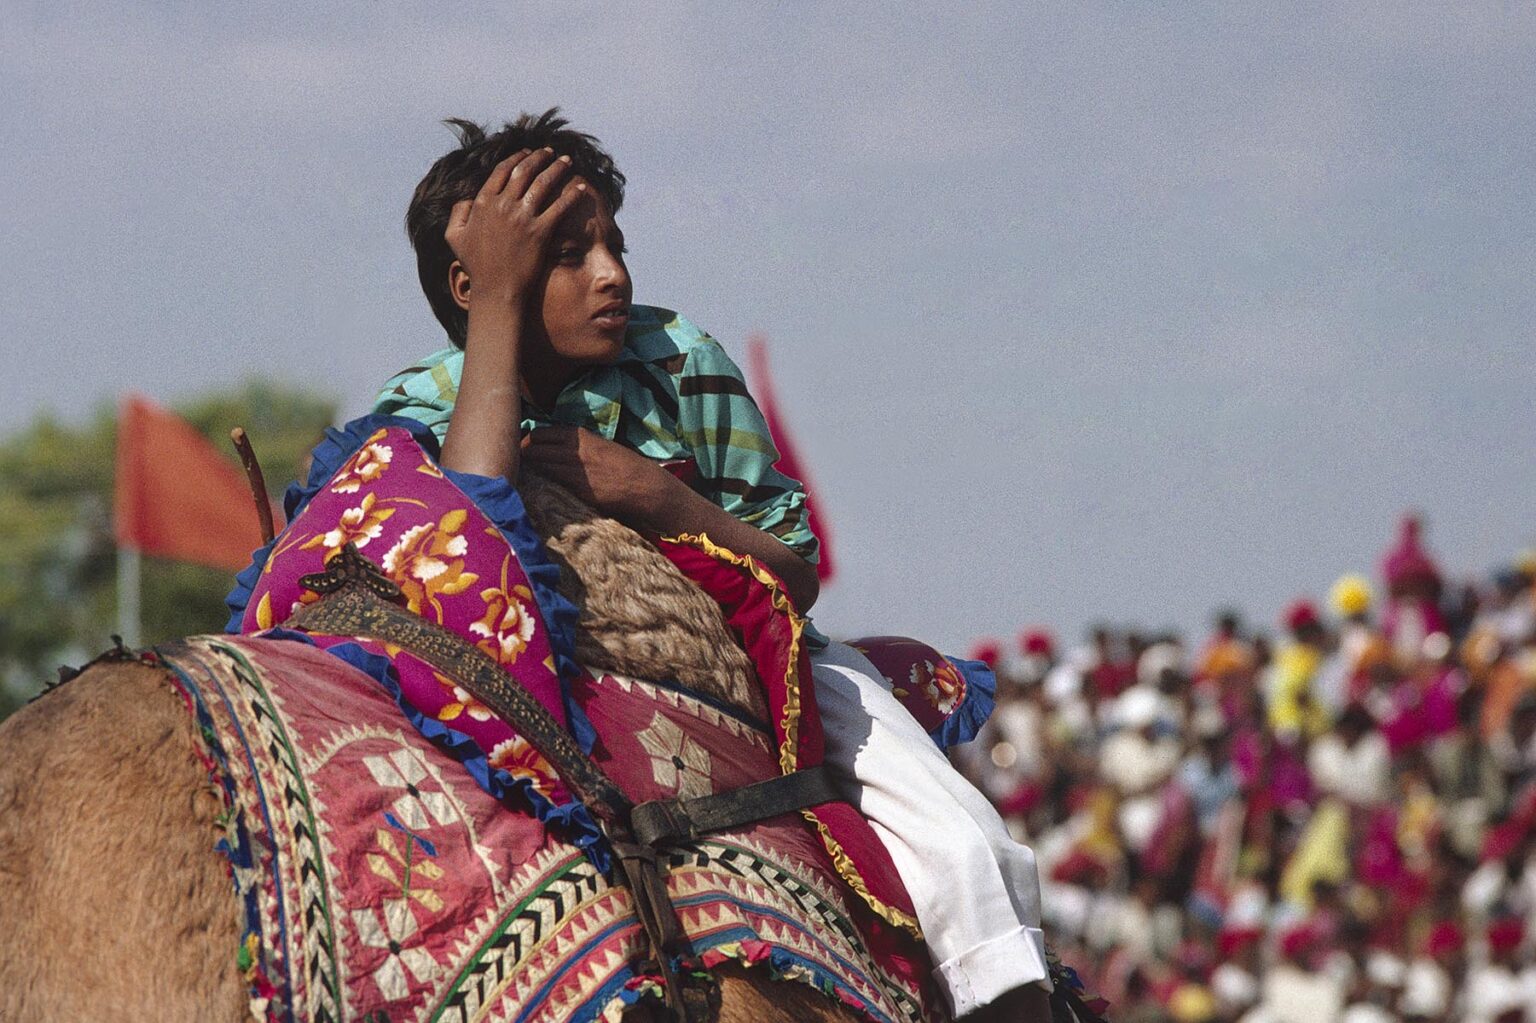 A RAJASTHANI BOY rides a CAMEL in front of a crowd at the PUSHKAR CAMEL FAIR - RAJASTHAN, INDIA